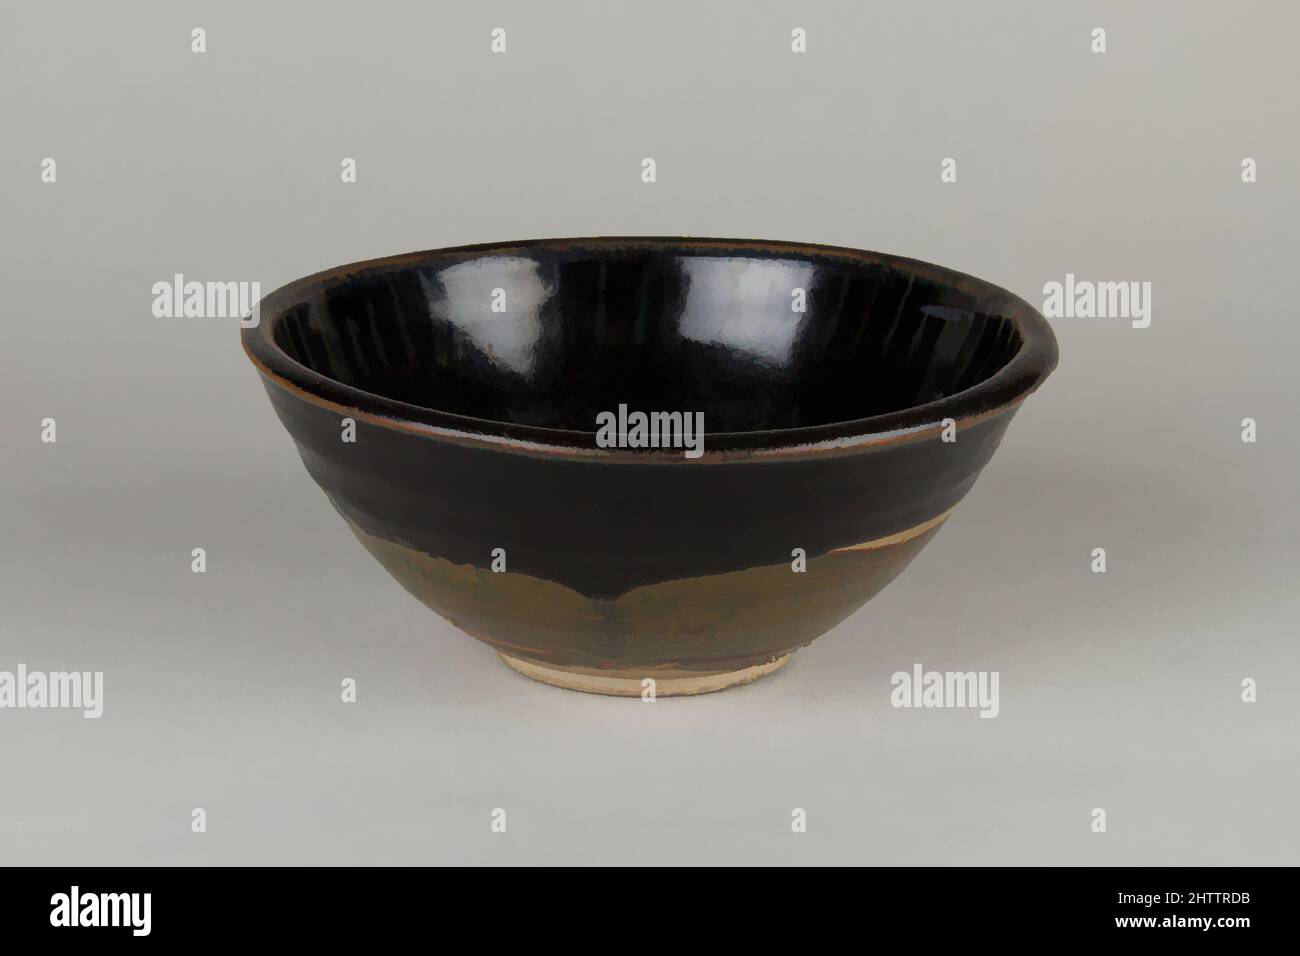 Art inspired by Bowl, Song dynasty (960–1279), China, Stoneware; dark slip on inner and outer surfaces, with black glaze, H. 2 7/8 in. (7.3 cm); Diam. 6 7/8 in. (17.5 cm); Diam. of foot 2 1/2 in. (6.4 cm), Ceramics, Classic works modernized by Artotop with a splash of modernity. Shapes, color and value, eye-catching visual impact on art. Emotions through freedom of artworks in a contemporary way. A timeless message pursuing a wildly creative new direction. Artists turning to the digital medium and creating the Artotop NFT Stock Photo